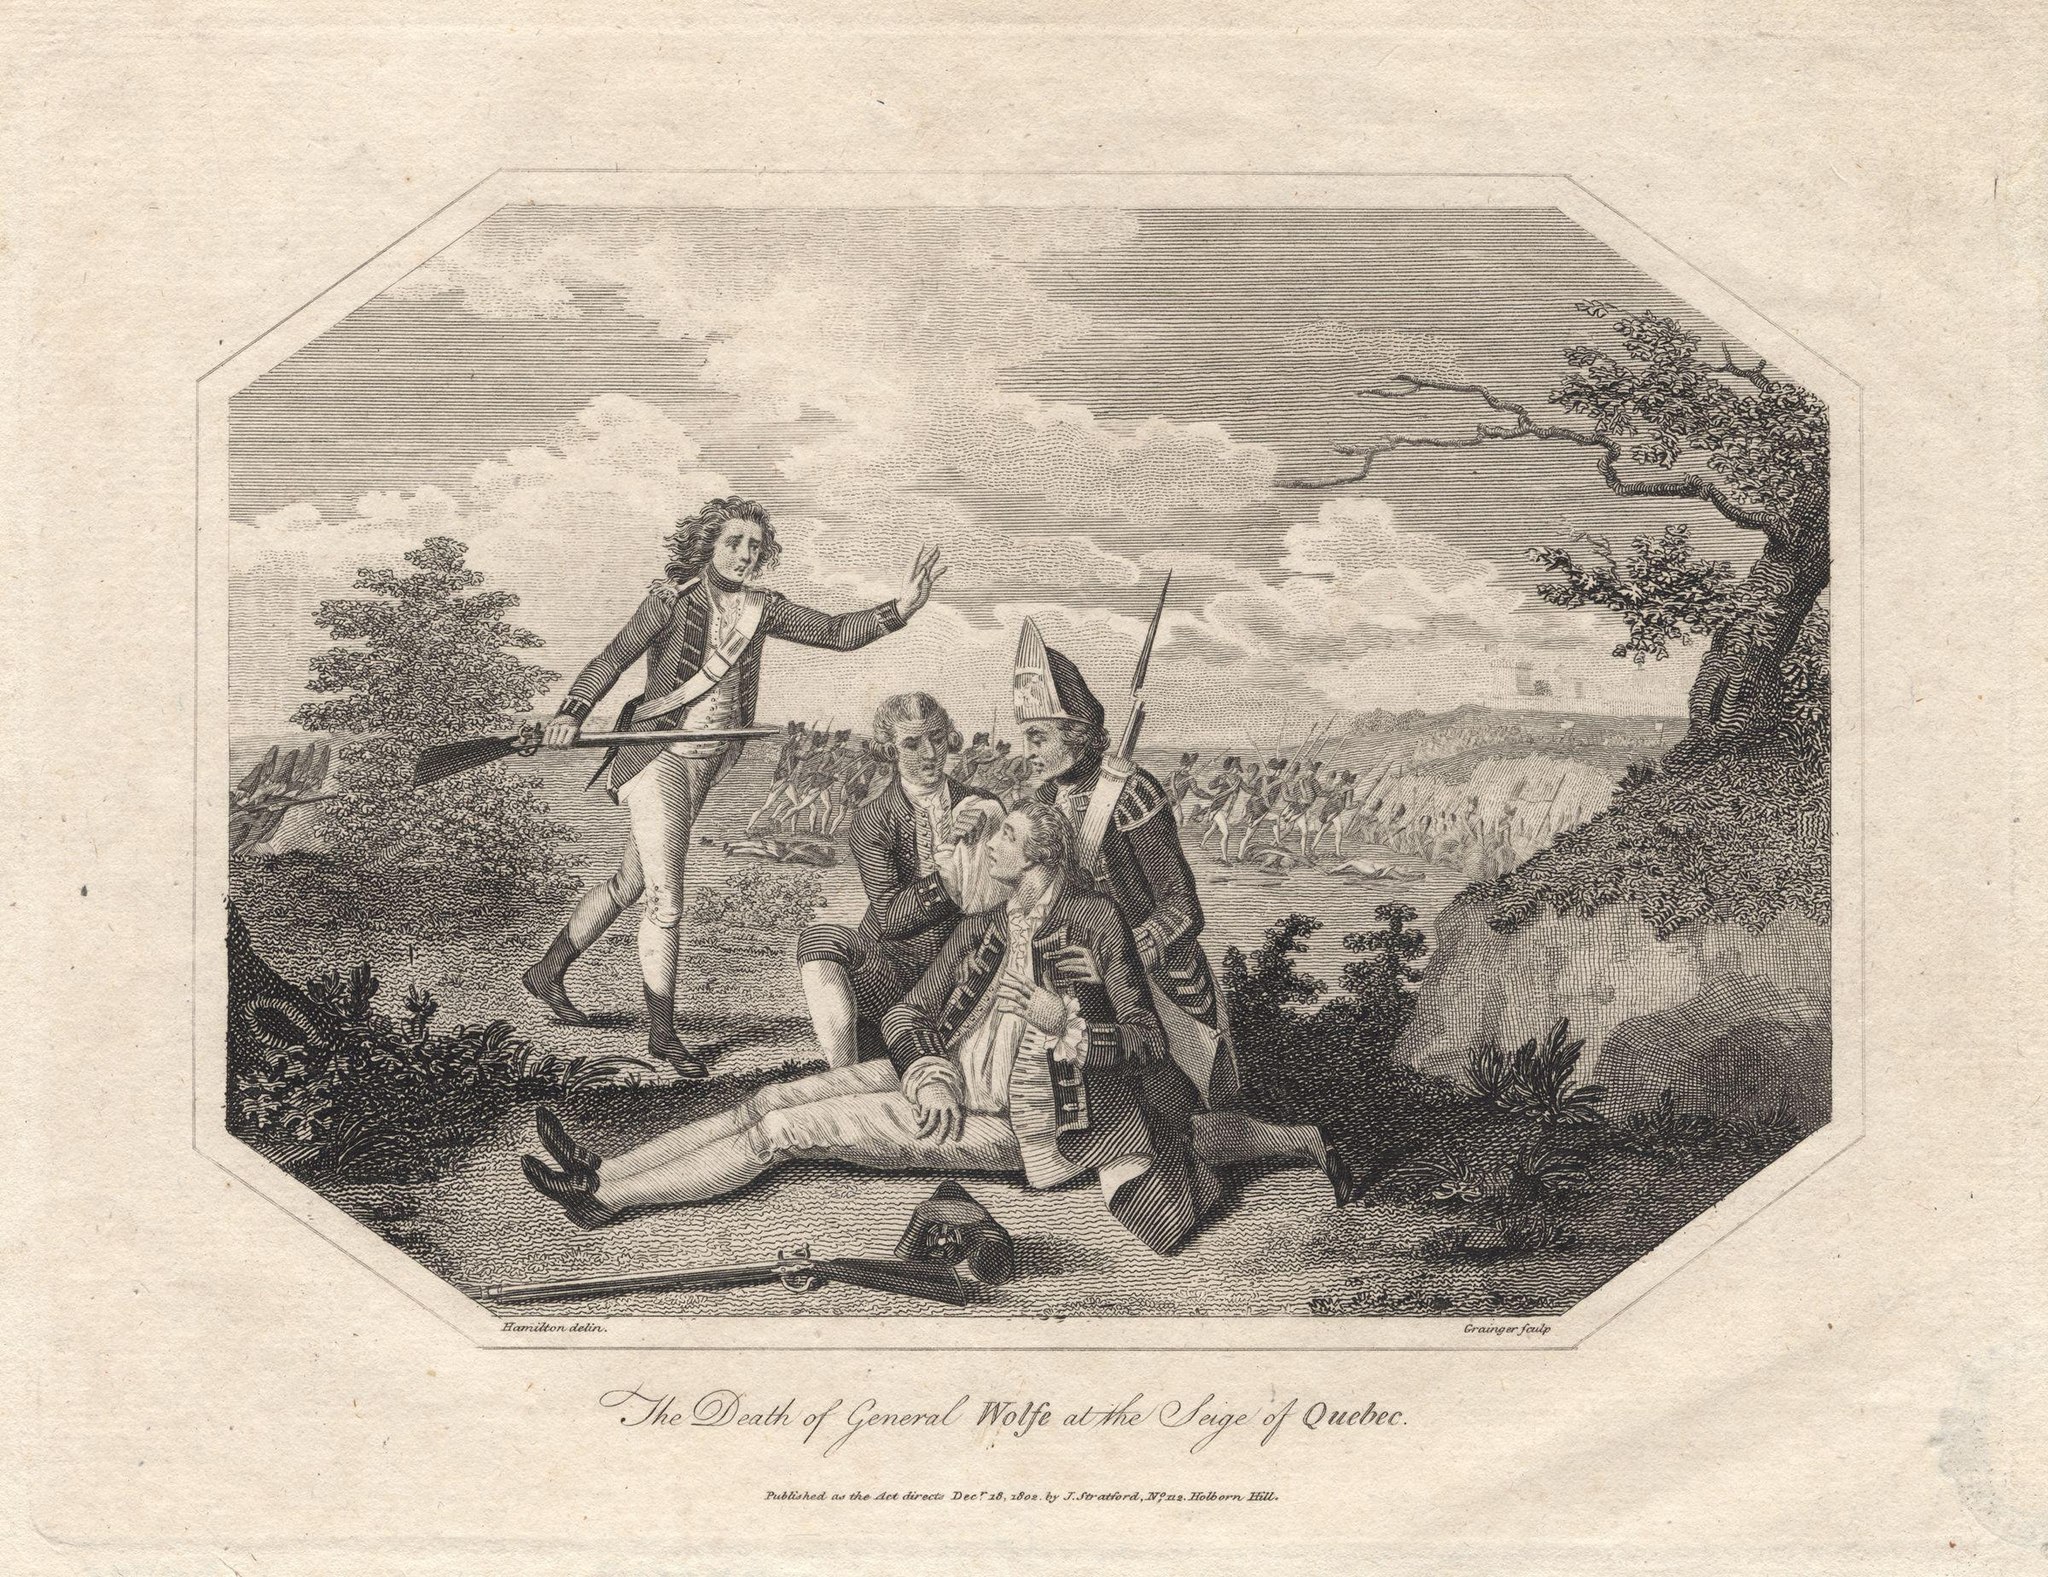 Engraving of a soldier carrying a musket rushing to the side of another soldier on the ground, tended to by two other men.